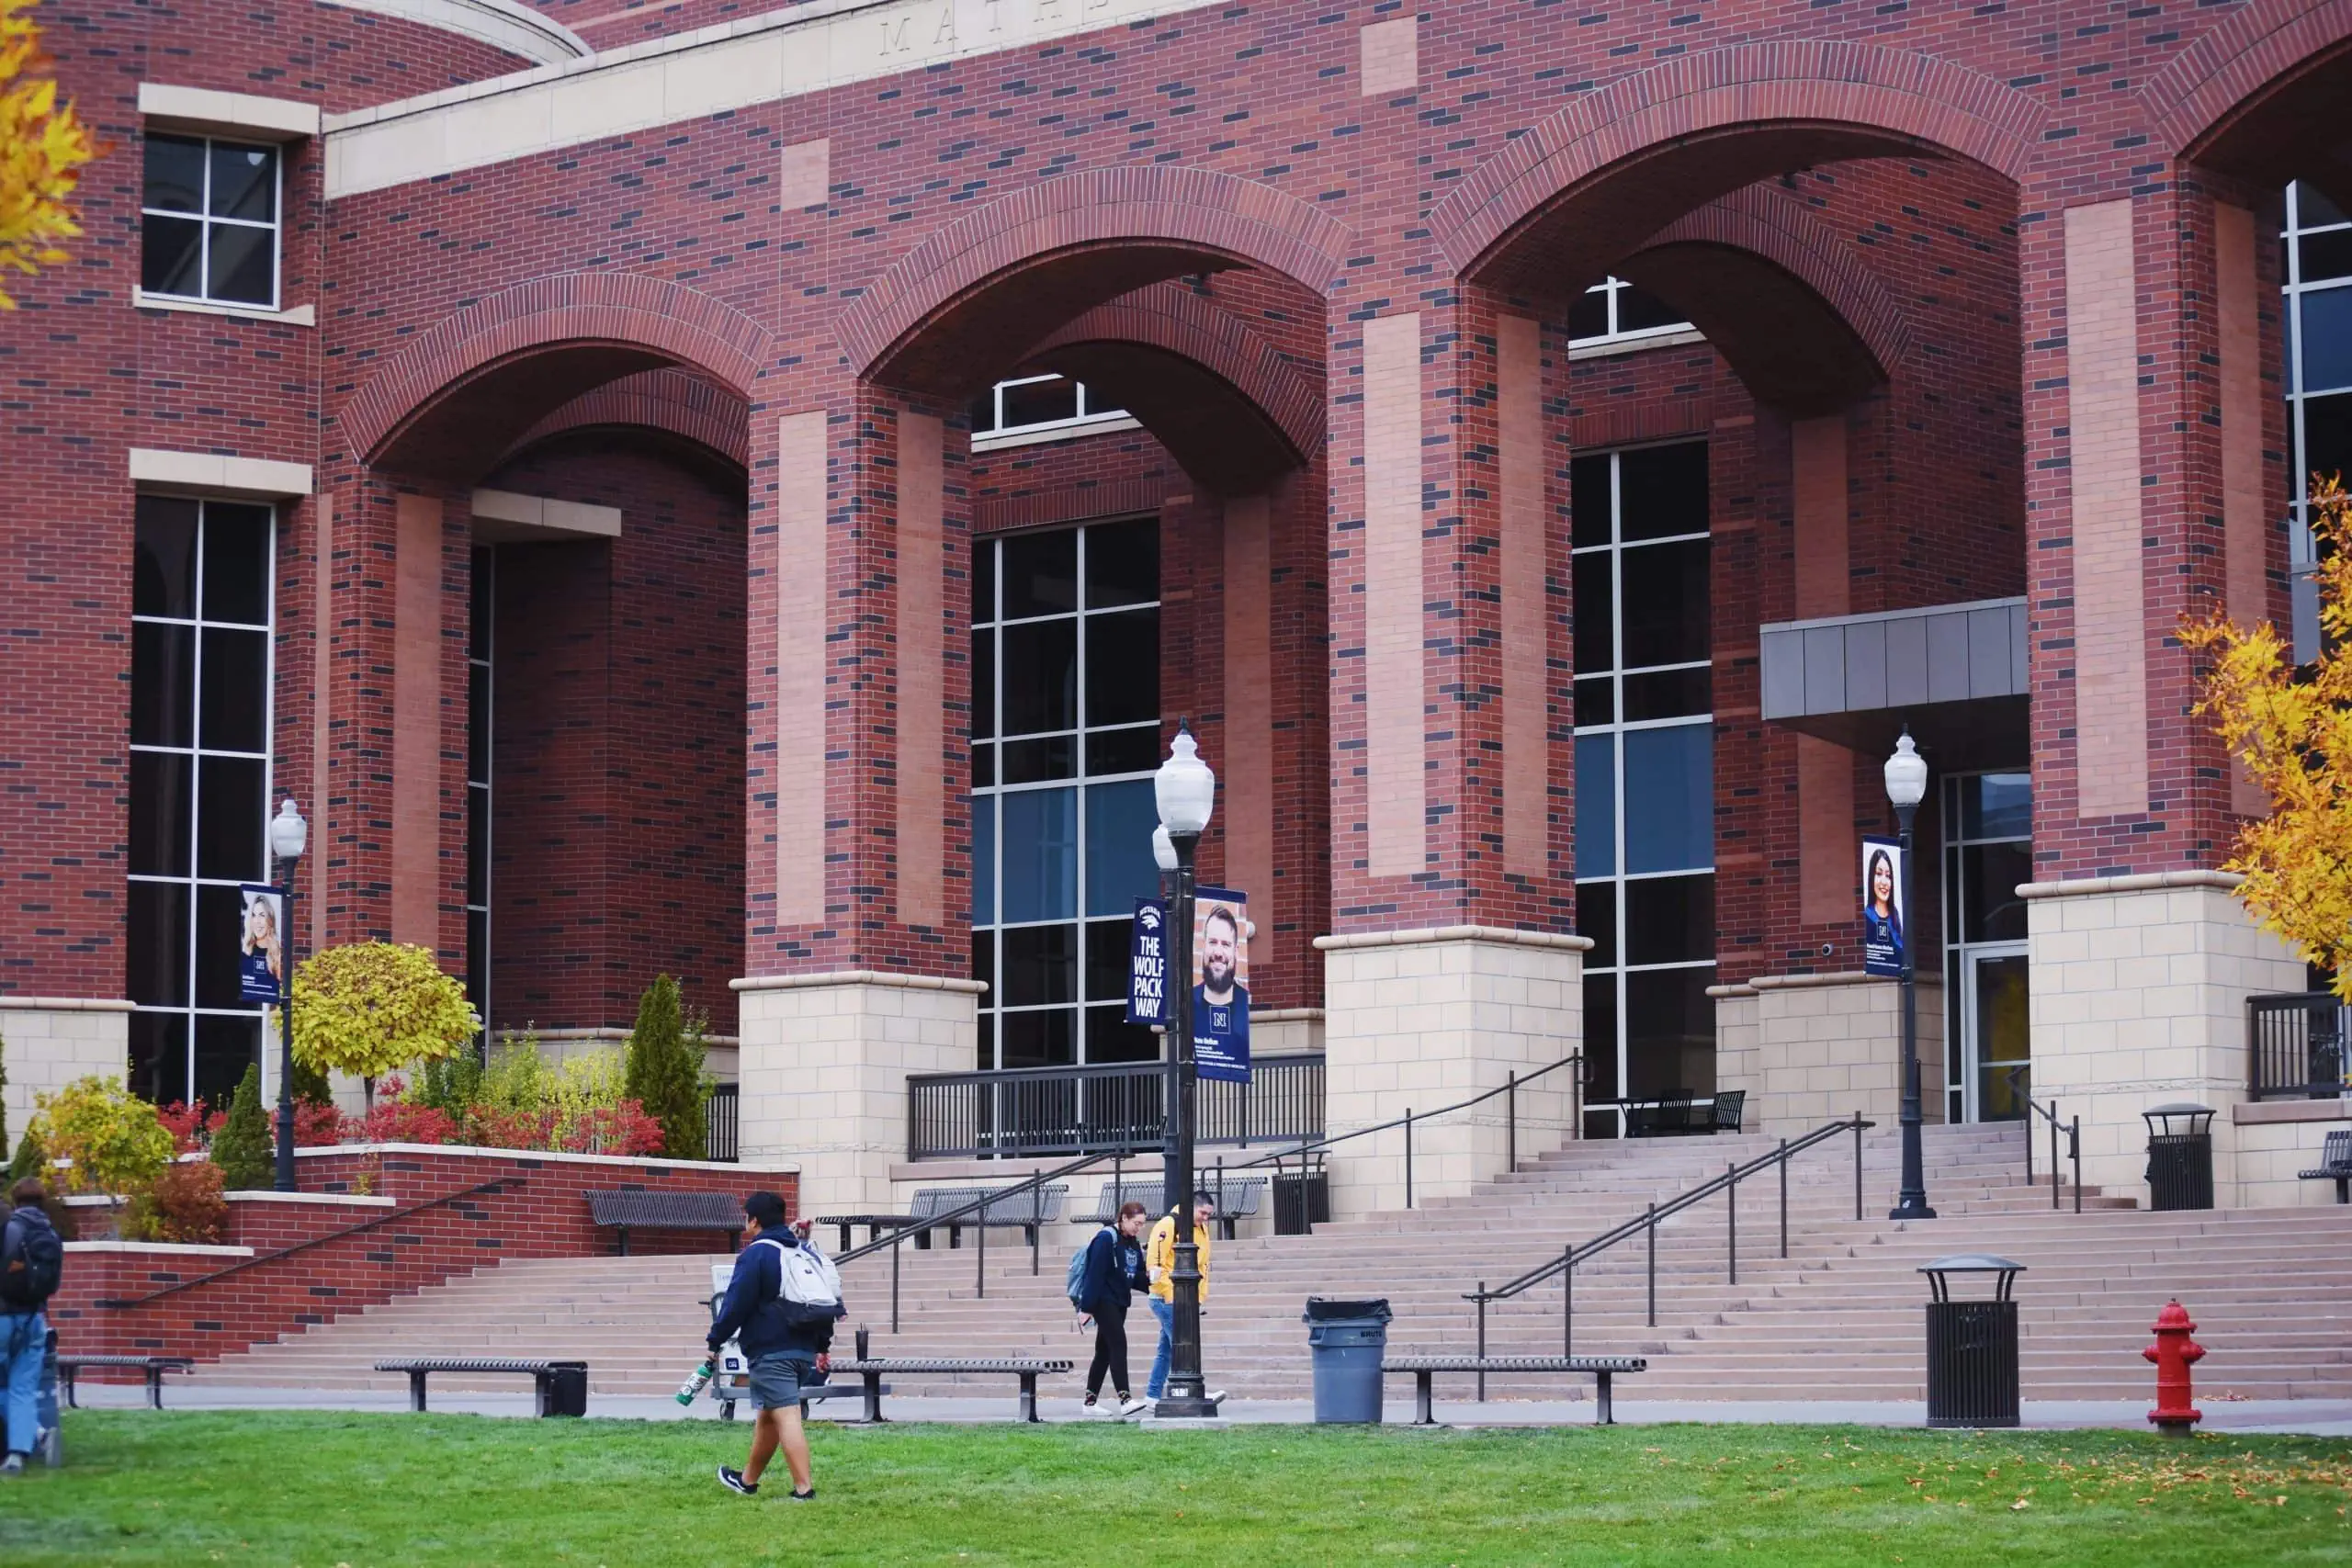 University of Nevada in Reno protects students and staff with security camera system 